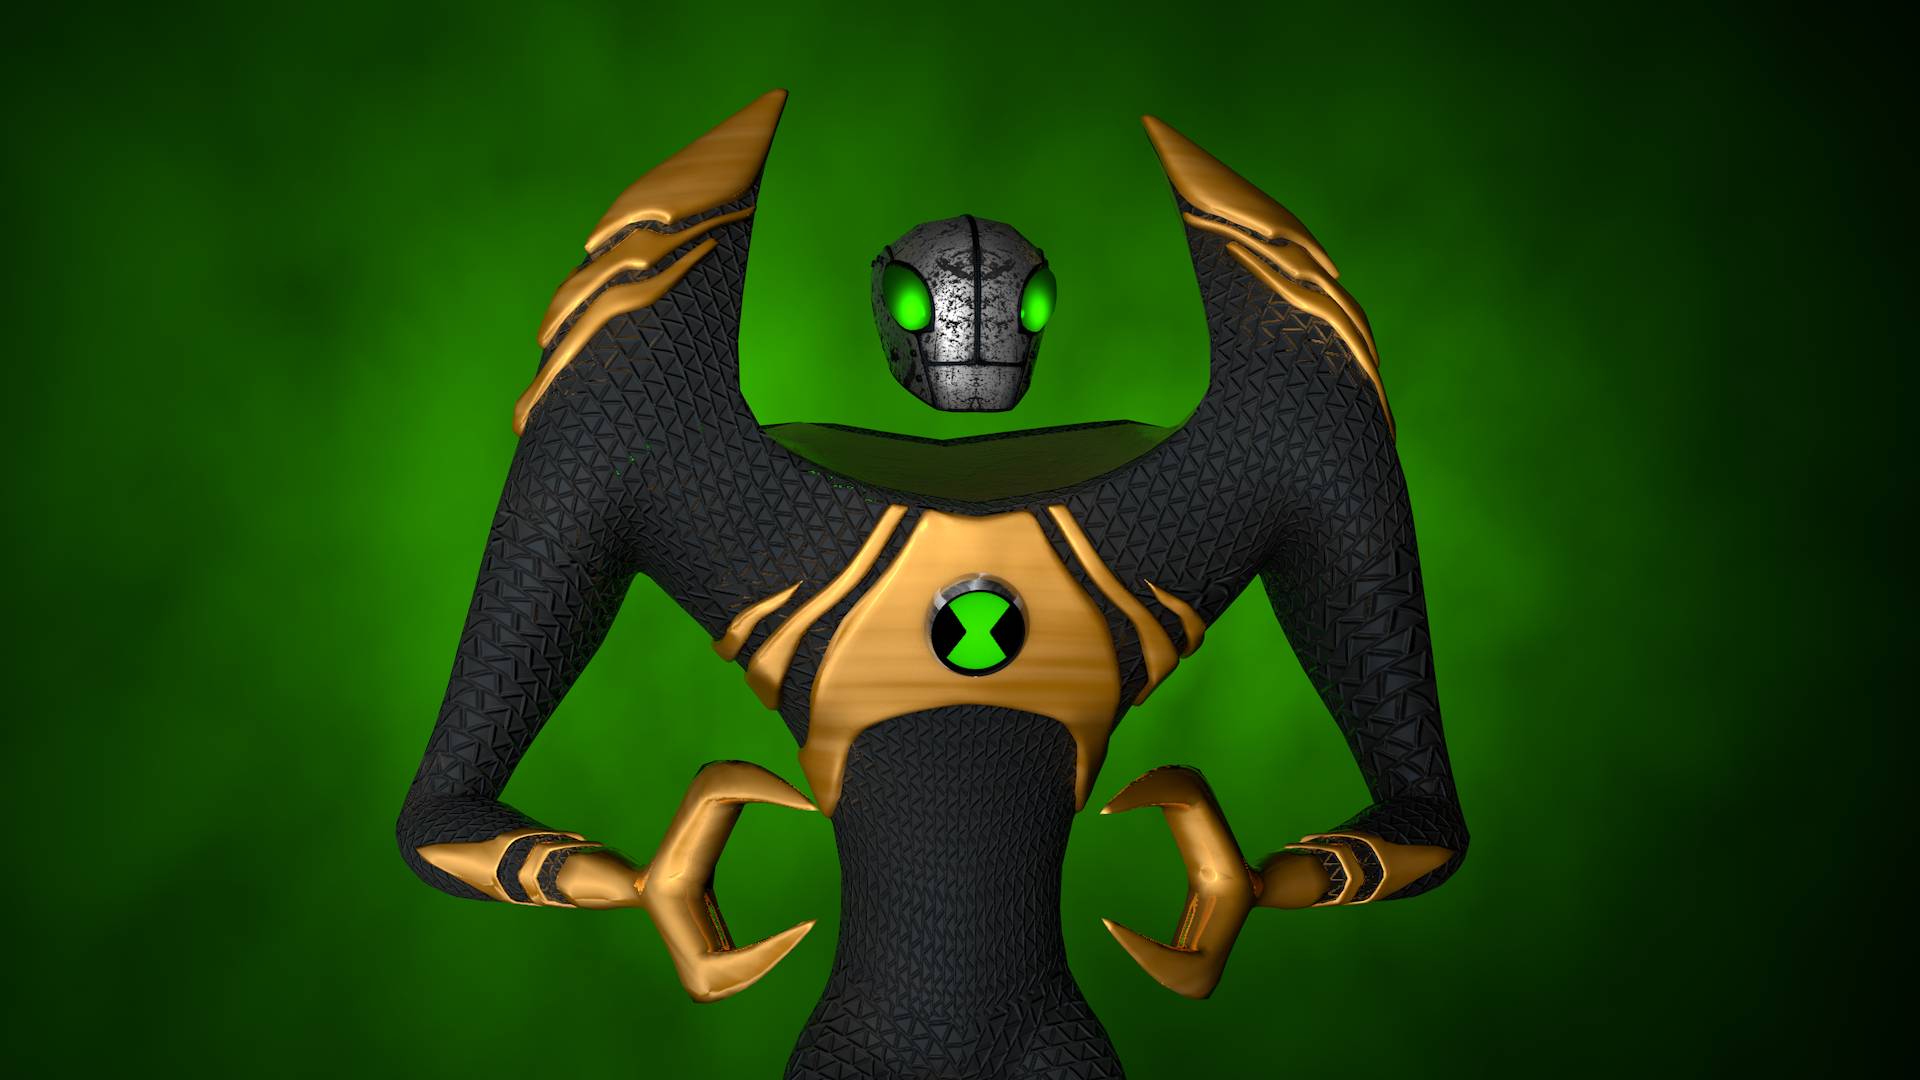 Ben 10000 - FourArms Classic Aliens 3D Model - Buy Royalty Free 3D